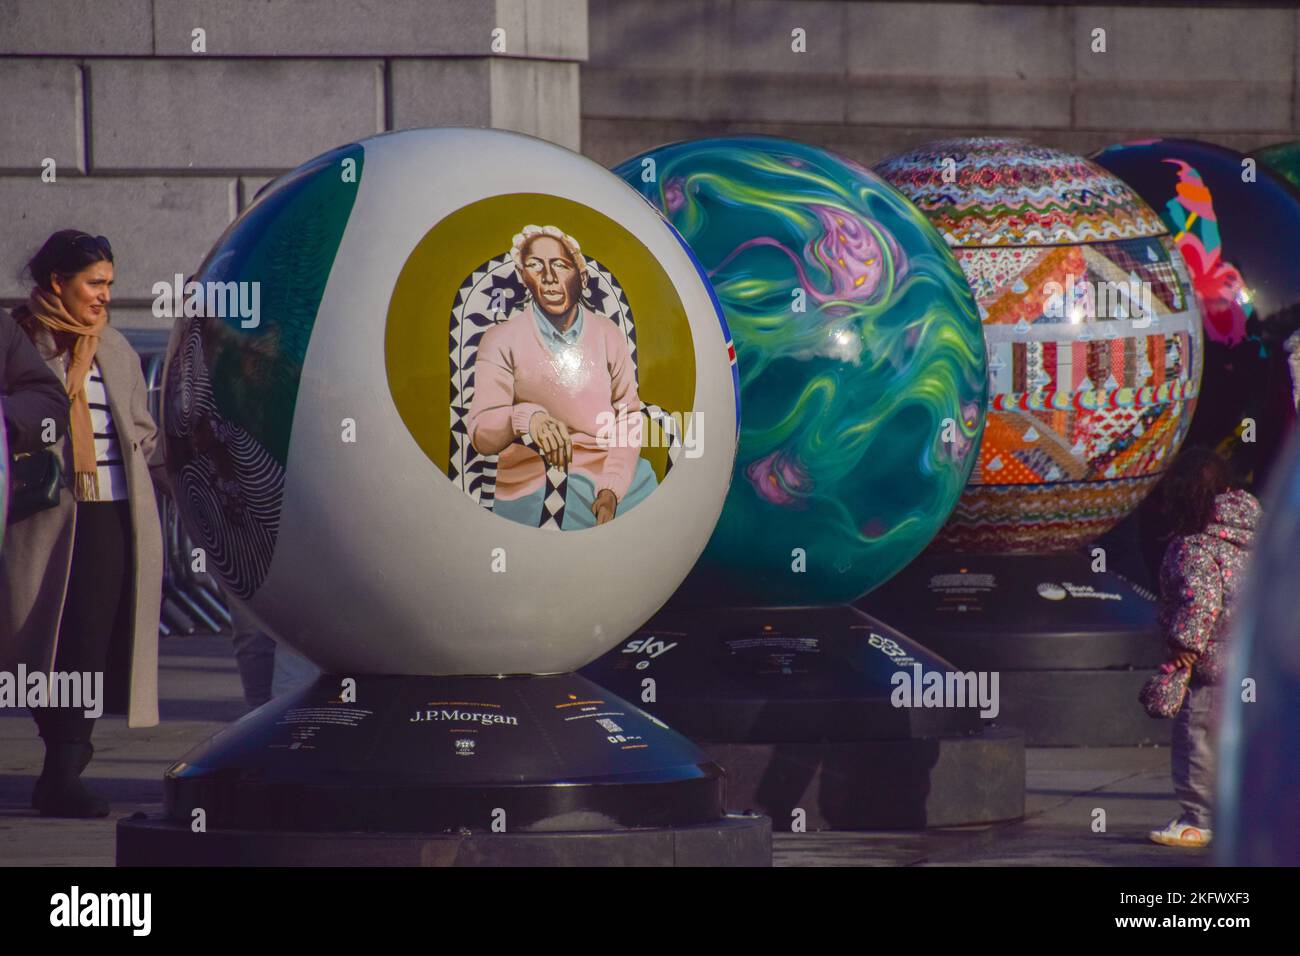 London, UK. 20th November 2022. 96 globes created by different artists have been exhibited in Trafalgar Square as part of ‘The World Reimagined’, a project exploring the history of the Transatlantic Trade in Enslaved Africans and its impact. Credit: Vuk Valcic/Alamy Live News Stock Photo